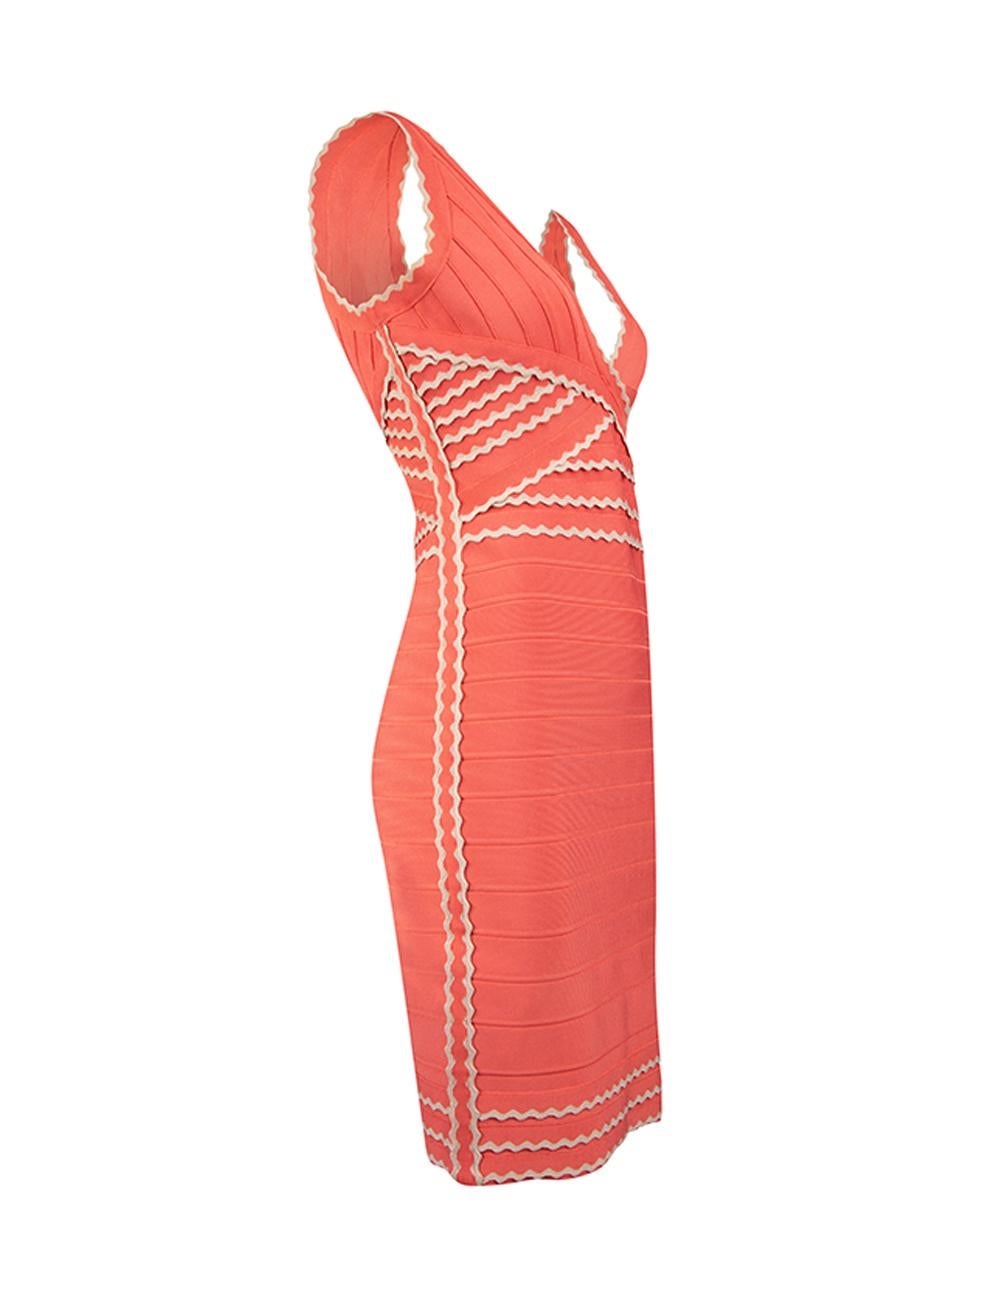 CONDITION is Very good. Hardly any visible wear to dress is evident on this used Herve Leger designer resale item. Details Coral Synthetic Mini bandage dress V neckline Wavy dusty pink trimmings Back zip closure with hook and eye Made in China